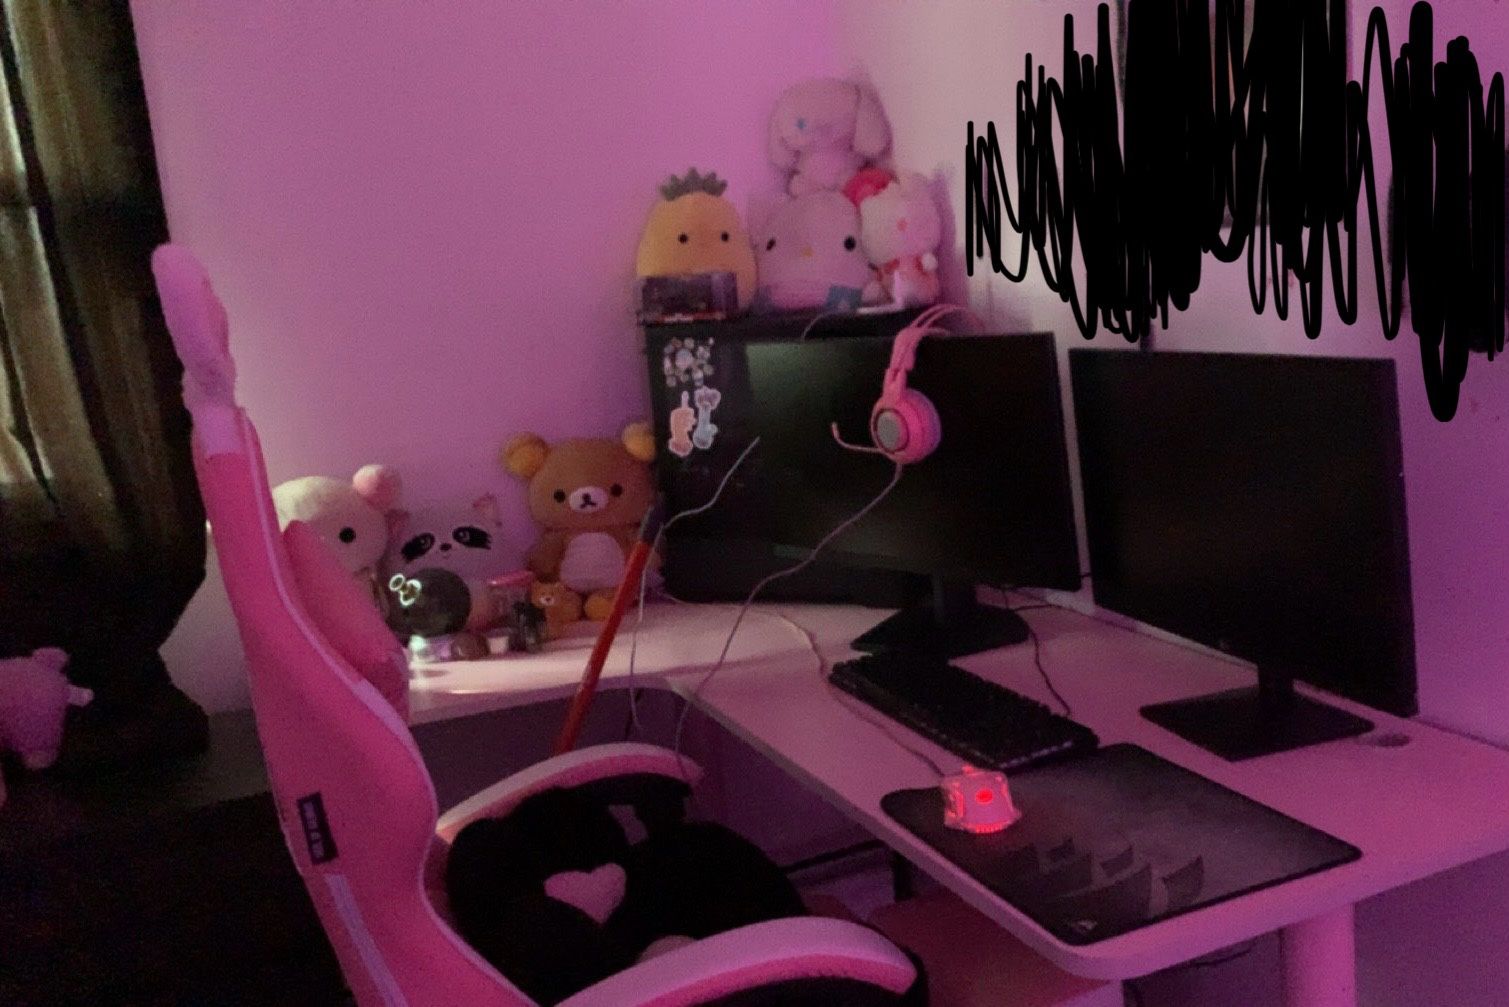 Selling Pc Comes With Monitors, Mouse, Headphones, Wifi Adapter Etc! Desk And Chair And decor Not Included Black Headset